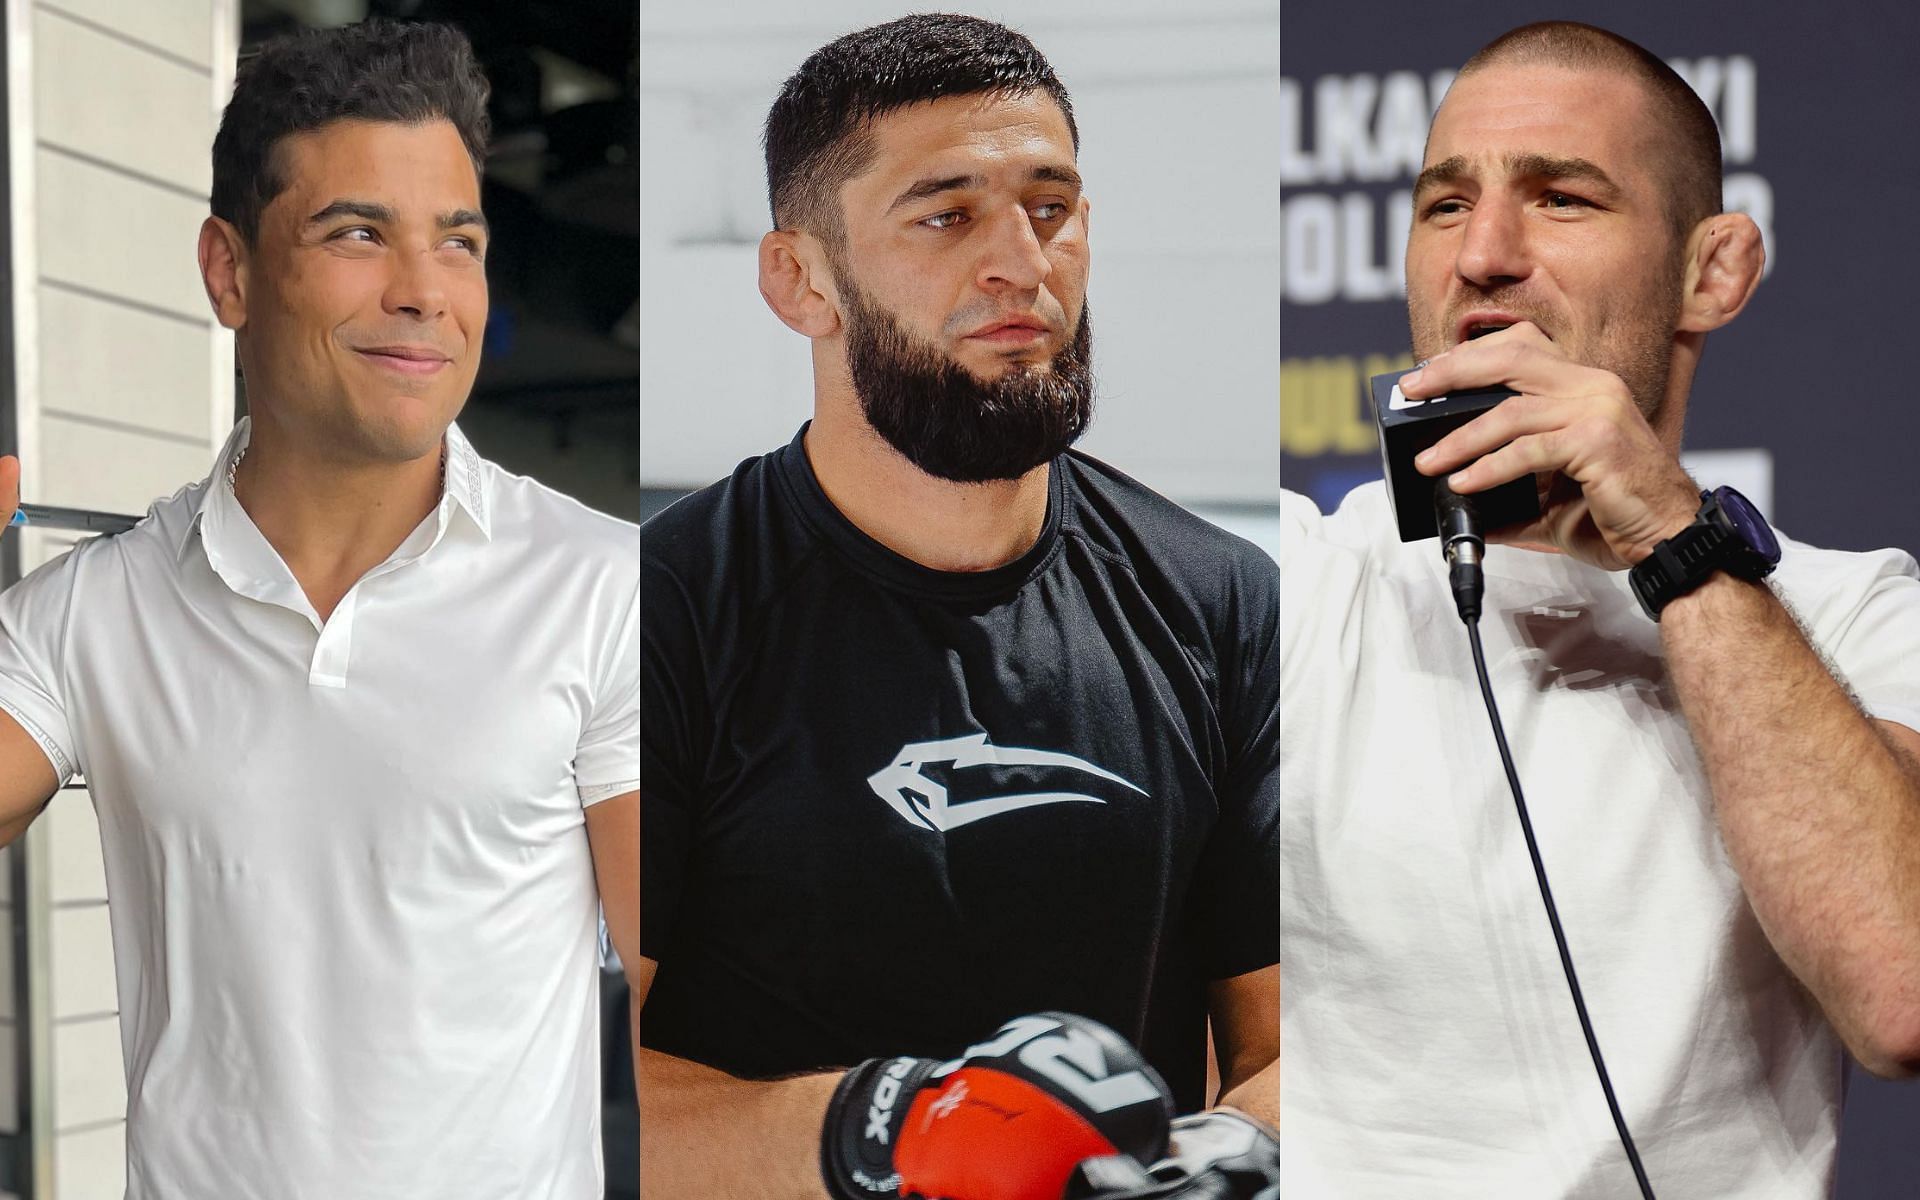 Paulo Costa (Left), Khamzat Chimaev (Middle), and Sean Strickland (Right) [Image courtesy: @borrachinhamma Instagram, @khamzat_chimaev Instagram, and Getty Images]